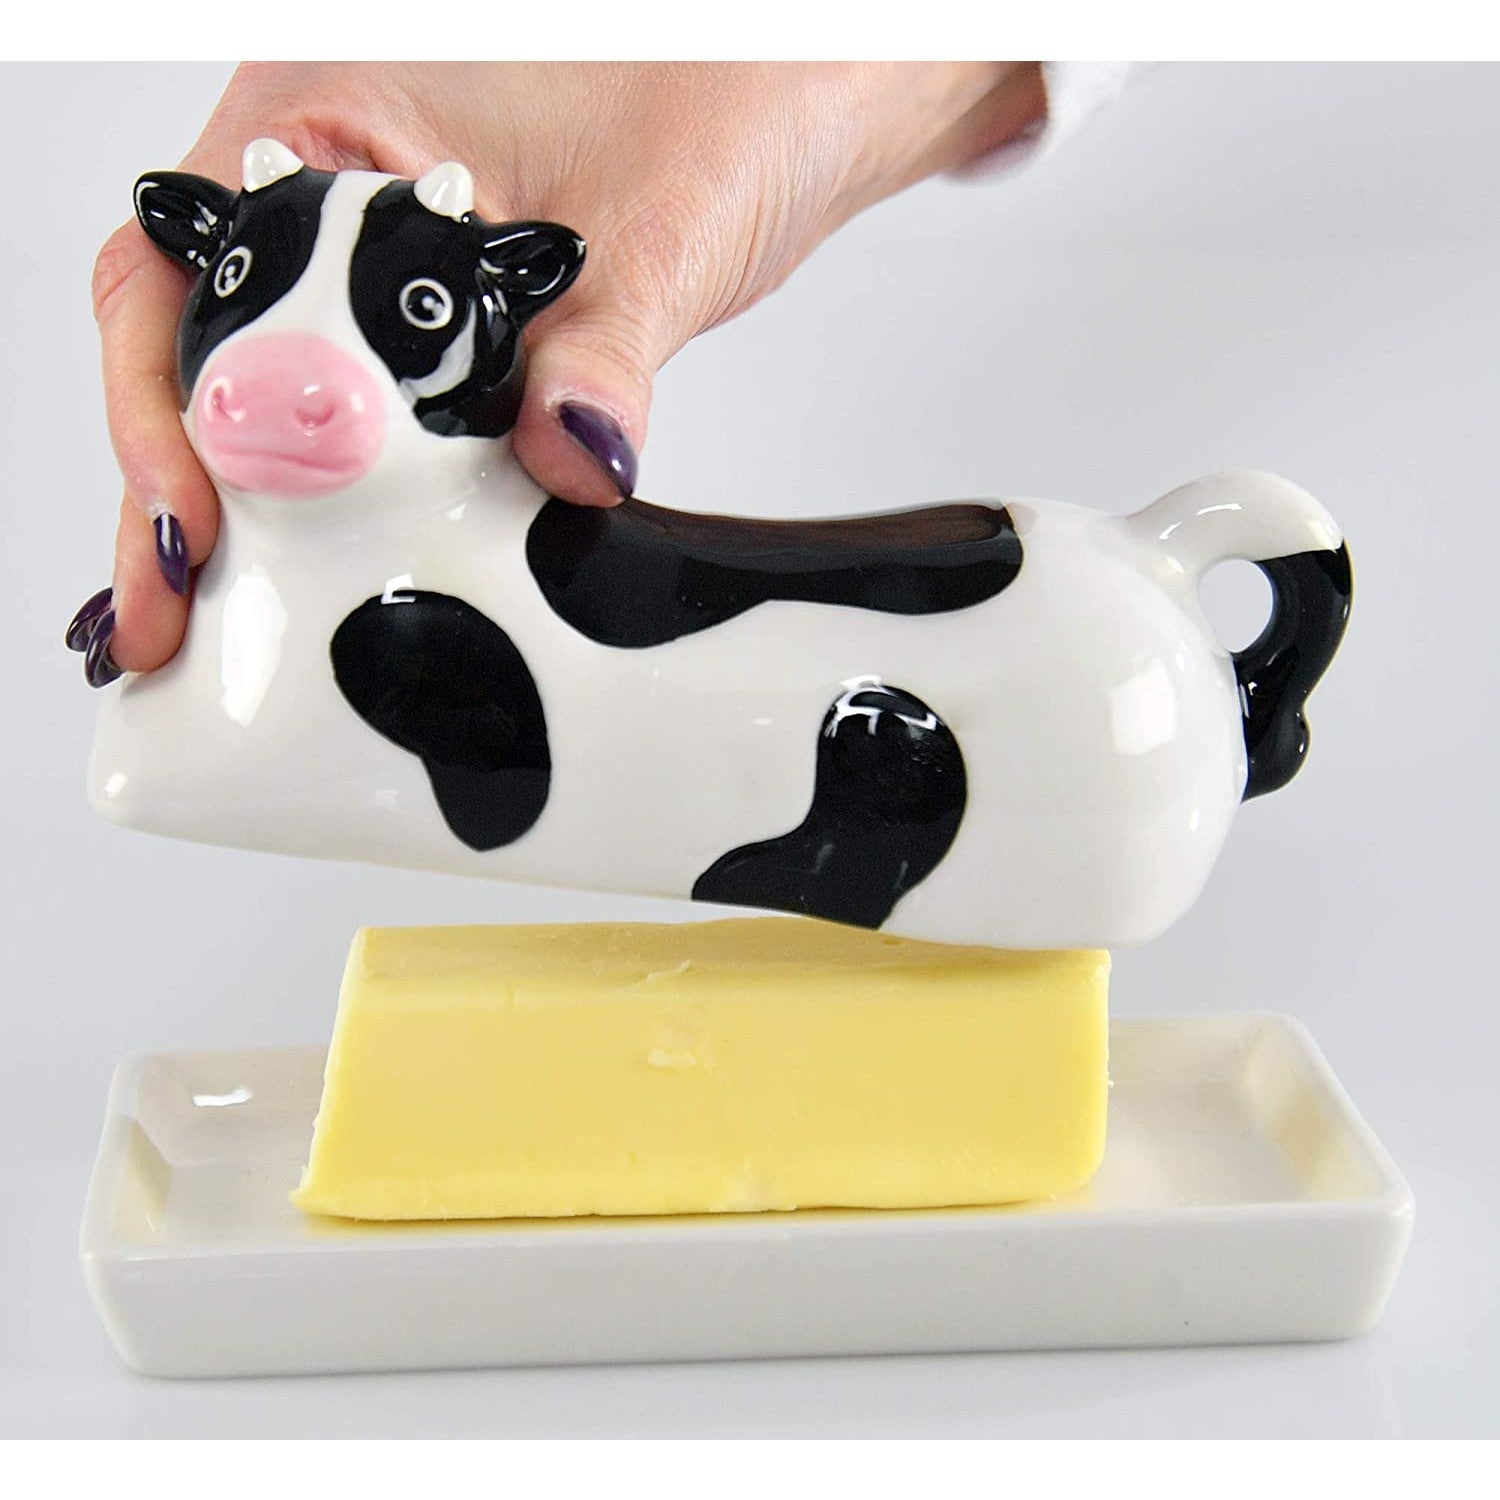 A black and white cow shaped butter dish. A hand is lifting the lid to reveal butter on the tray.